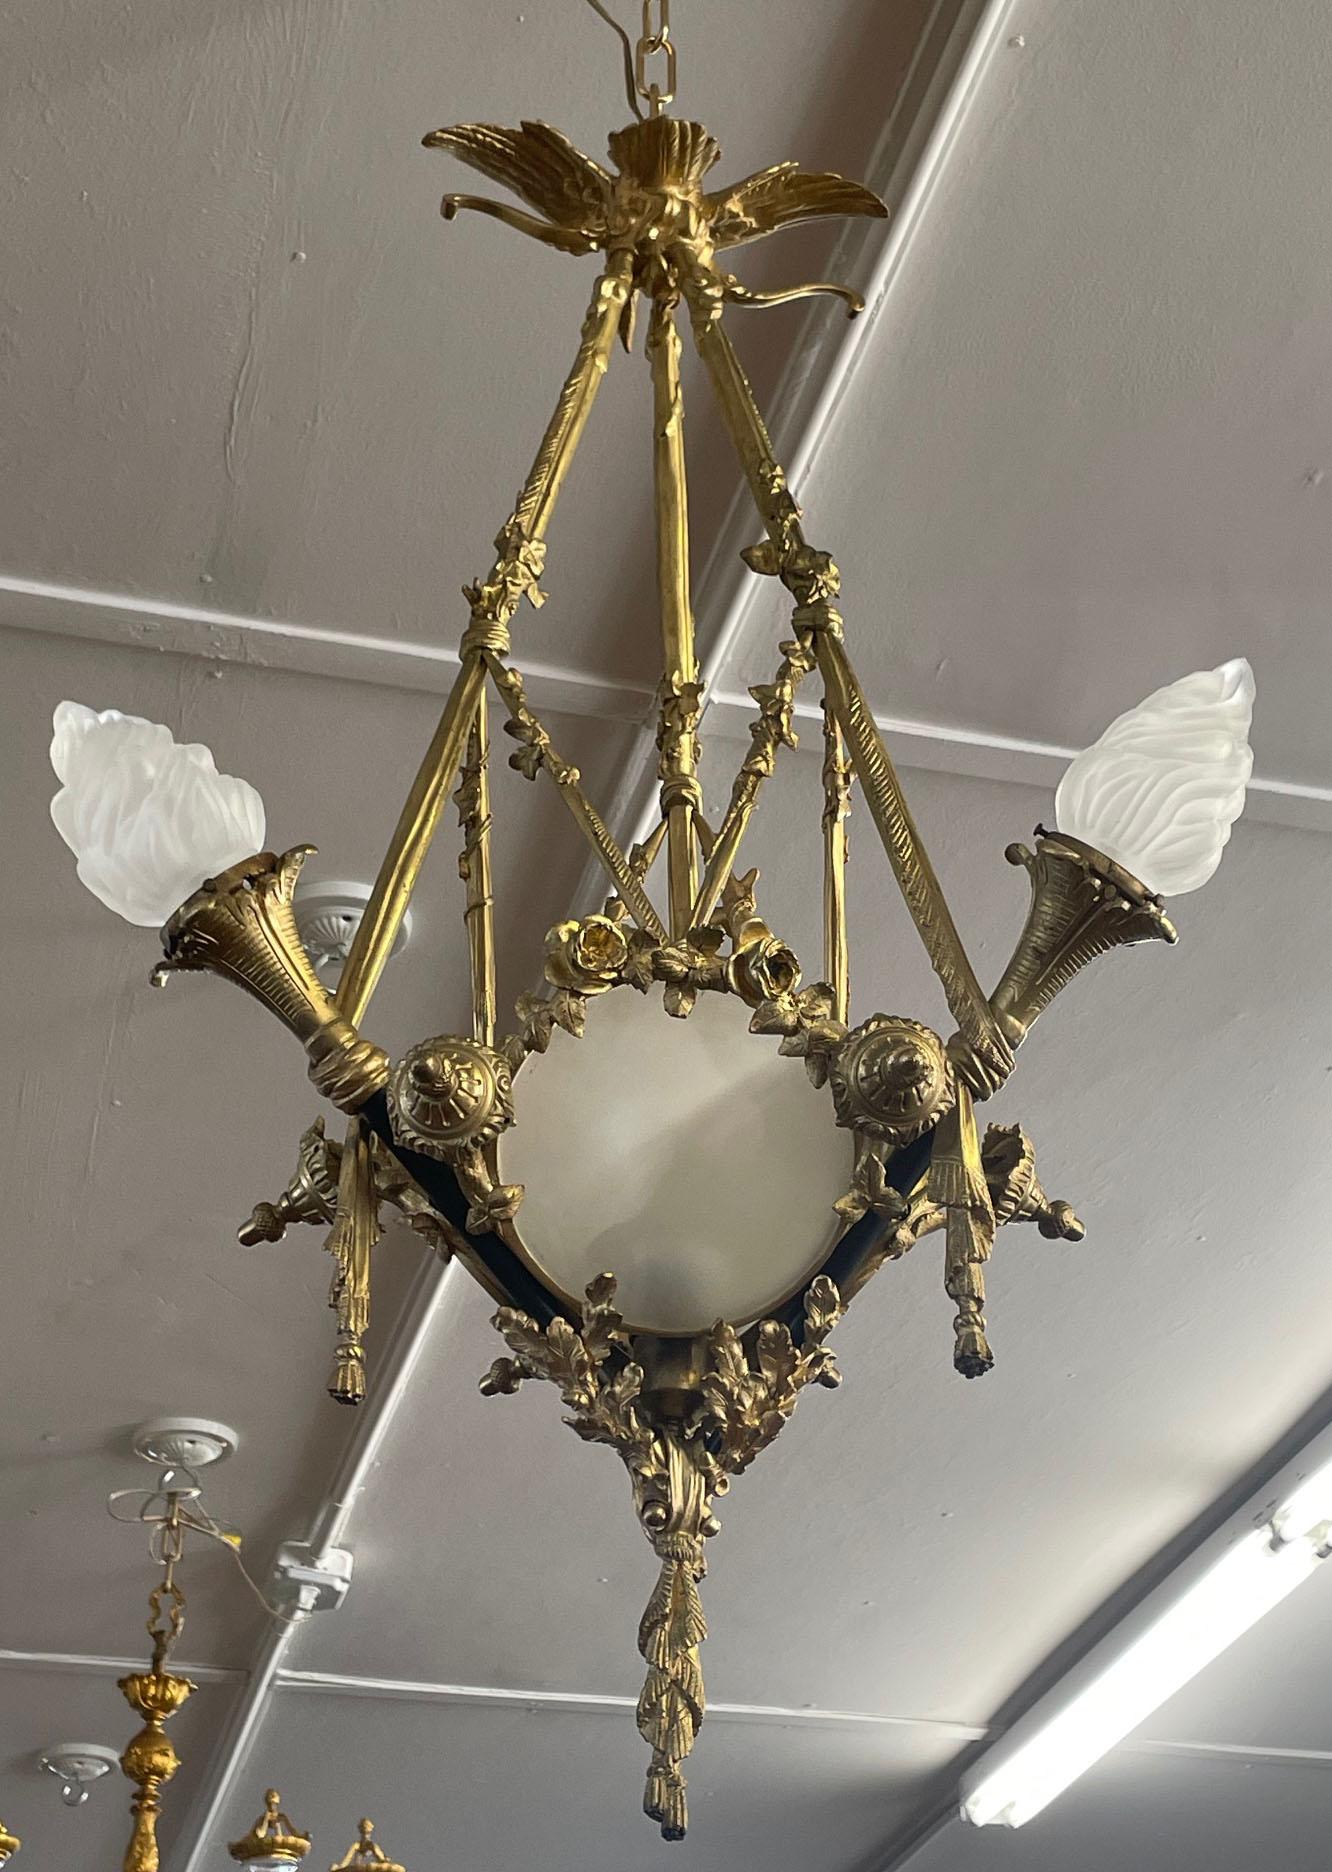 Gorgeous Early 20th Century Bronze French Style 4 Light Chandelier With Shades

Dimensions : 38